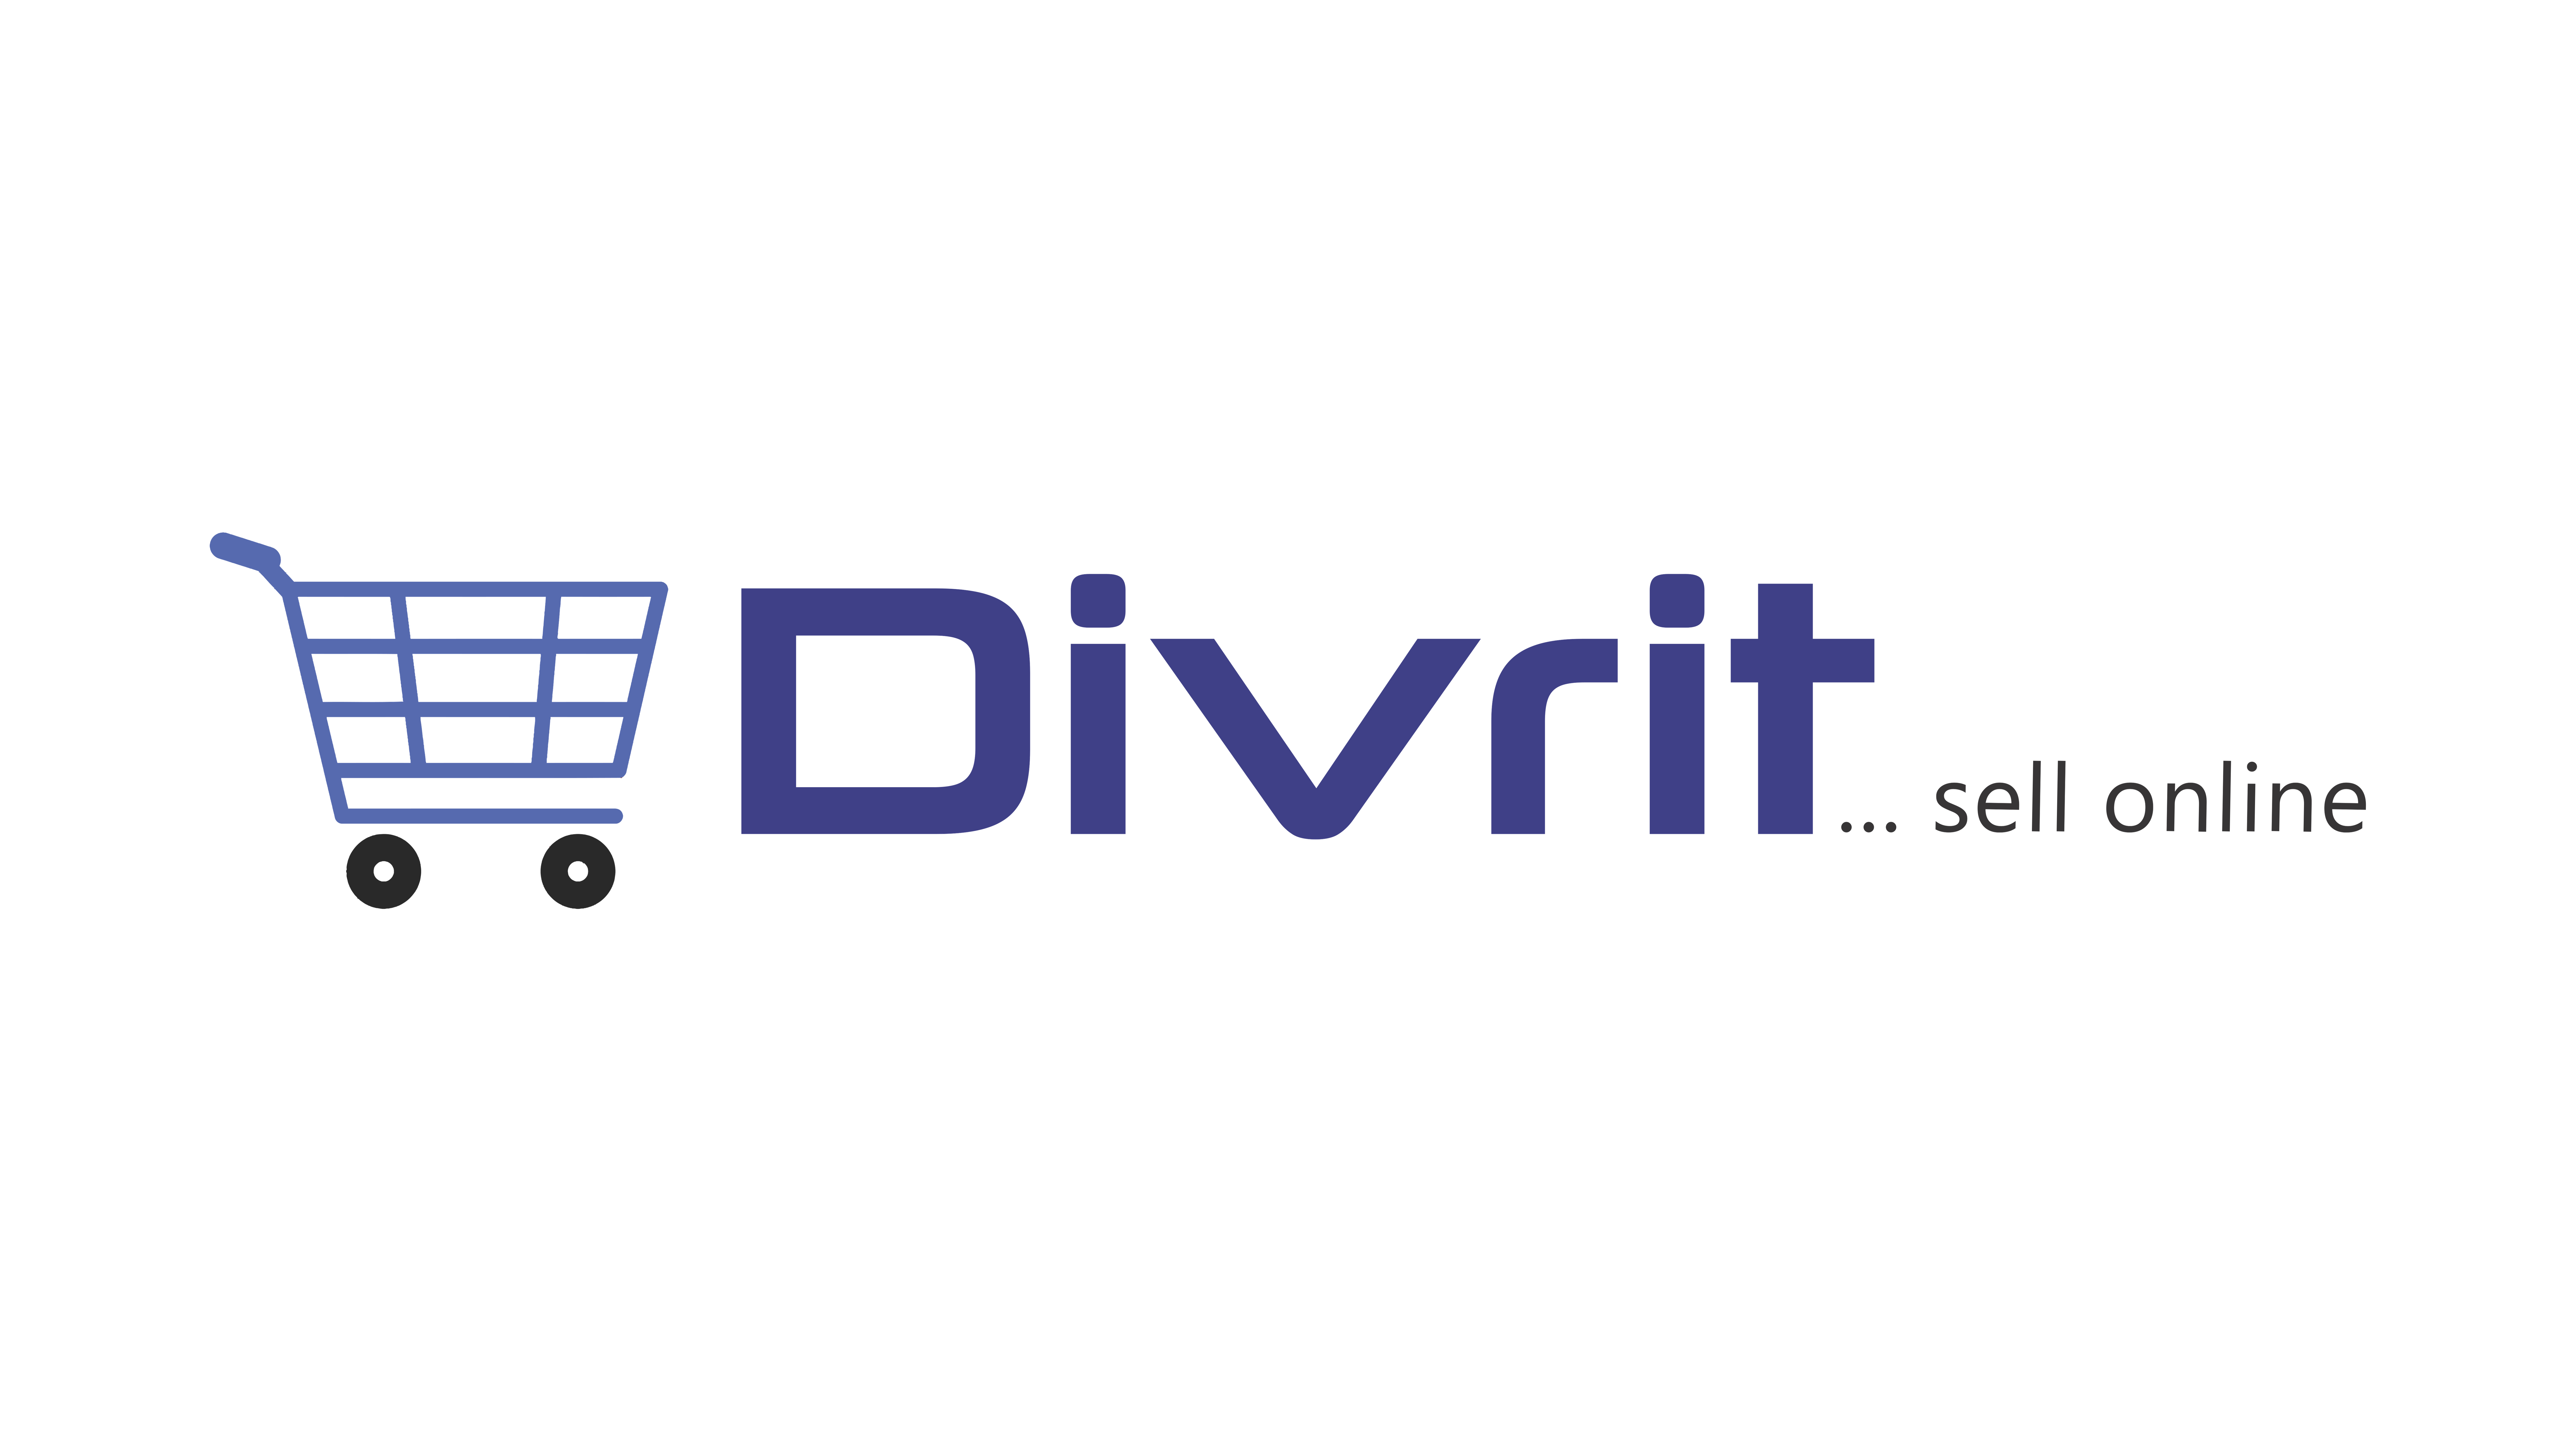 Partner with Divrit Consultancy - Walmart.com solution provider page